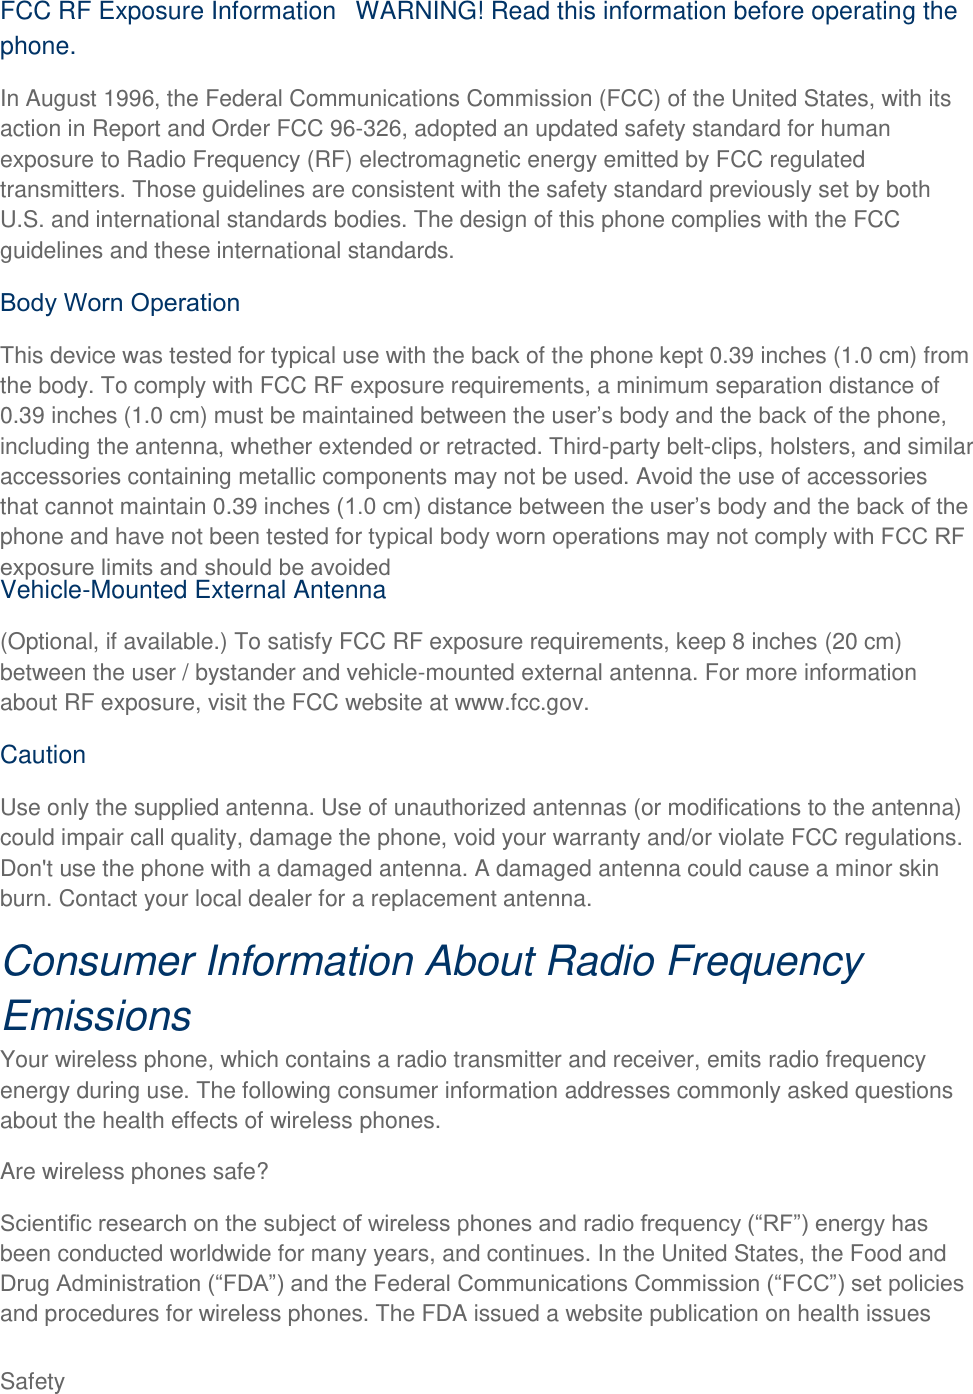  Safety FCC RF Exposure Information WARNING! Read this information before operating the phone. In August 1996, the Federal Communications Commission (FCC) of the United States, with its action in Report and Order FCC 96-326, adopted an updated safety standard for human exposure to Radio Frequency (RF) electromagnetic energy emitted by FCC regulated transmitters. Those guidelines are consistent with the safety standard previously set by both U.S. and international standards bodies. The design of this phone complies with the FCC guidelines and these international standards. This device was tested for typical use with the back of the phone kept 0.39 inches (1.0 cm) from the body. To comply with FCC RF exposure requirements, a minimum separation distance of 0.39 inches (1.0 cm) must be maintained between the usincluding the antenna, whether extended or retracted. Third-party belt-clips, holsters, and similar accessories containing metallic components  not be used. Avoid the use of accessories that cannot maintain 0.39 iphone and have not been tested for Vehicle-Mounted External Antenna (Optional, if available.) To satisfy FCC RF exposure requirements, keep 8 inches (20 cm) between the user / bystander and vehicle-mounted external antenna. For more information about RF exposure, visit the FCC website at www.fcc.gov. Caution Use only the supplied antenna. Use of unauthorized antennas (or modifications to the antenna) could impair call quality, damage the phone, void your warranty and/or violate FCC regulations. Don&apos;t use the phone with a damaged antenna. A damaged antenna could cause a minor skin burn. Contact your local dealer for a replacement antenna. Consumer Information About Radio Frequency Emissions Your wireless phone, which contains a radio transmitter and receiver, emits radio frequency energy during use. The following consumer information addresses commonly asked questions about the health effects of wireless phones.  Are wireless phones safe? been conducted worldwide for many years, and continues. In the United States, the Food and and procedures for wireless phones. The FDA issued a website publication on health issues 